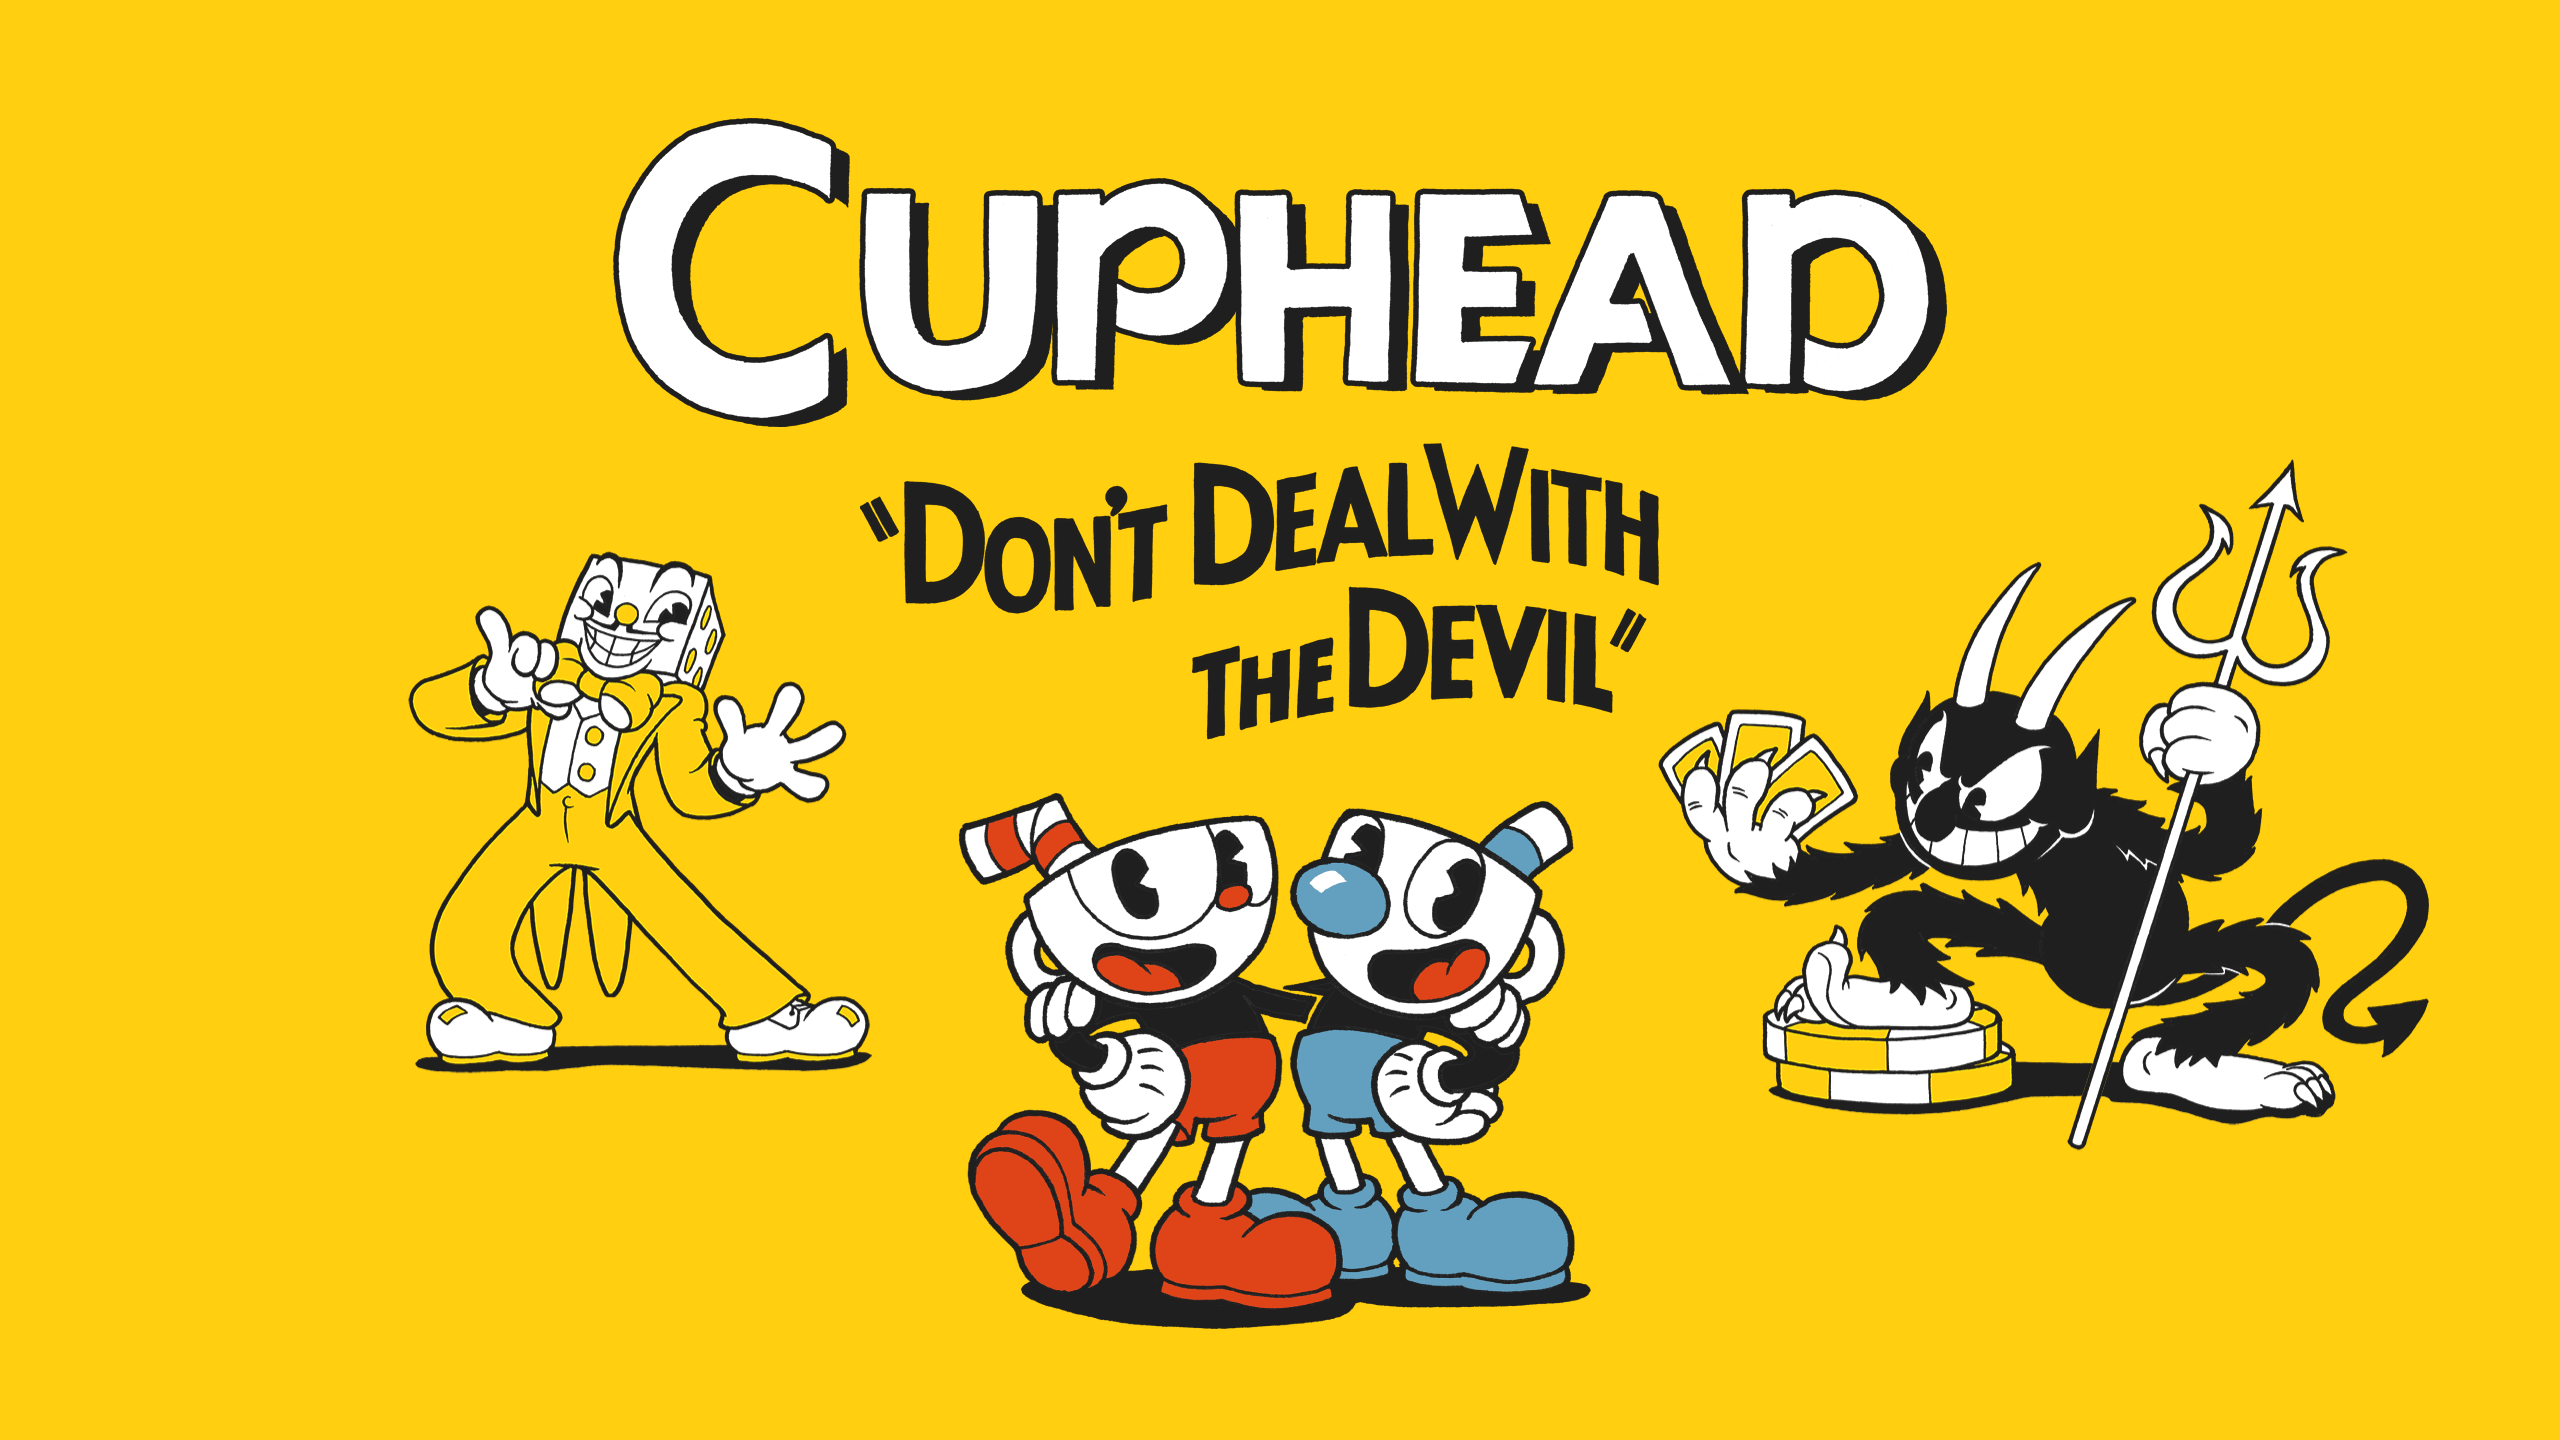 Studio MDHR  Our hearts are singing from all your warm words about the  release of Cupheads Sheet Music Weve added chart samples and  instrumentation guides and created a downloadable wallpaper to